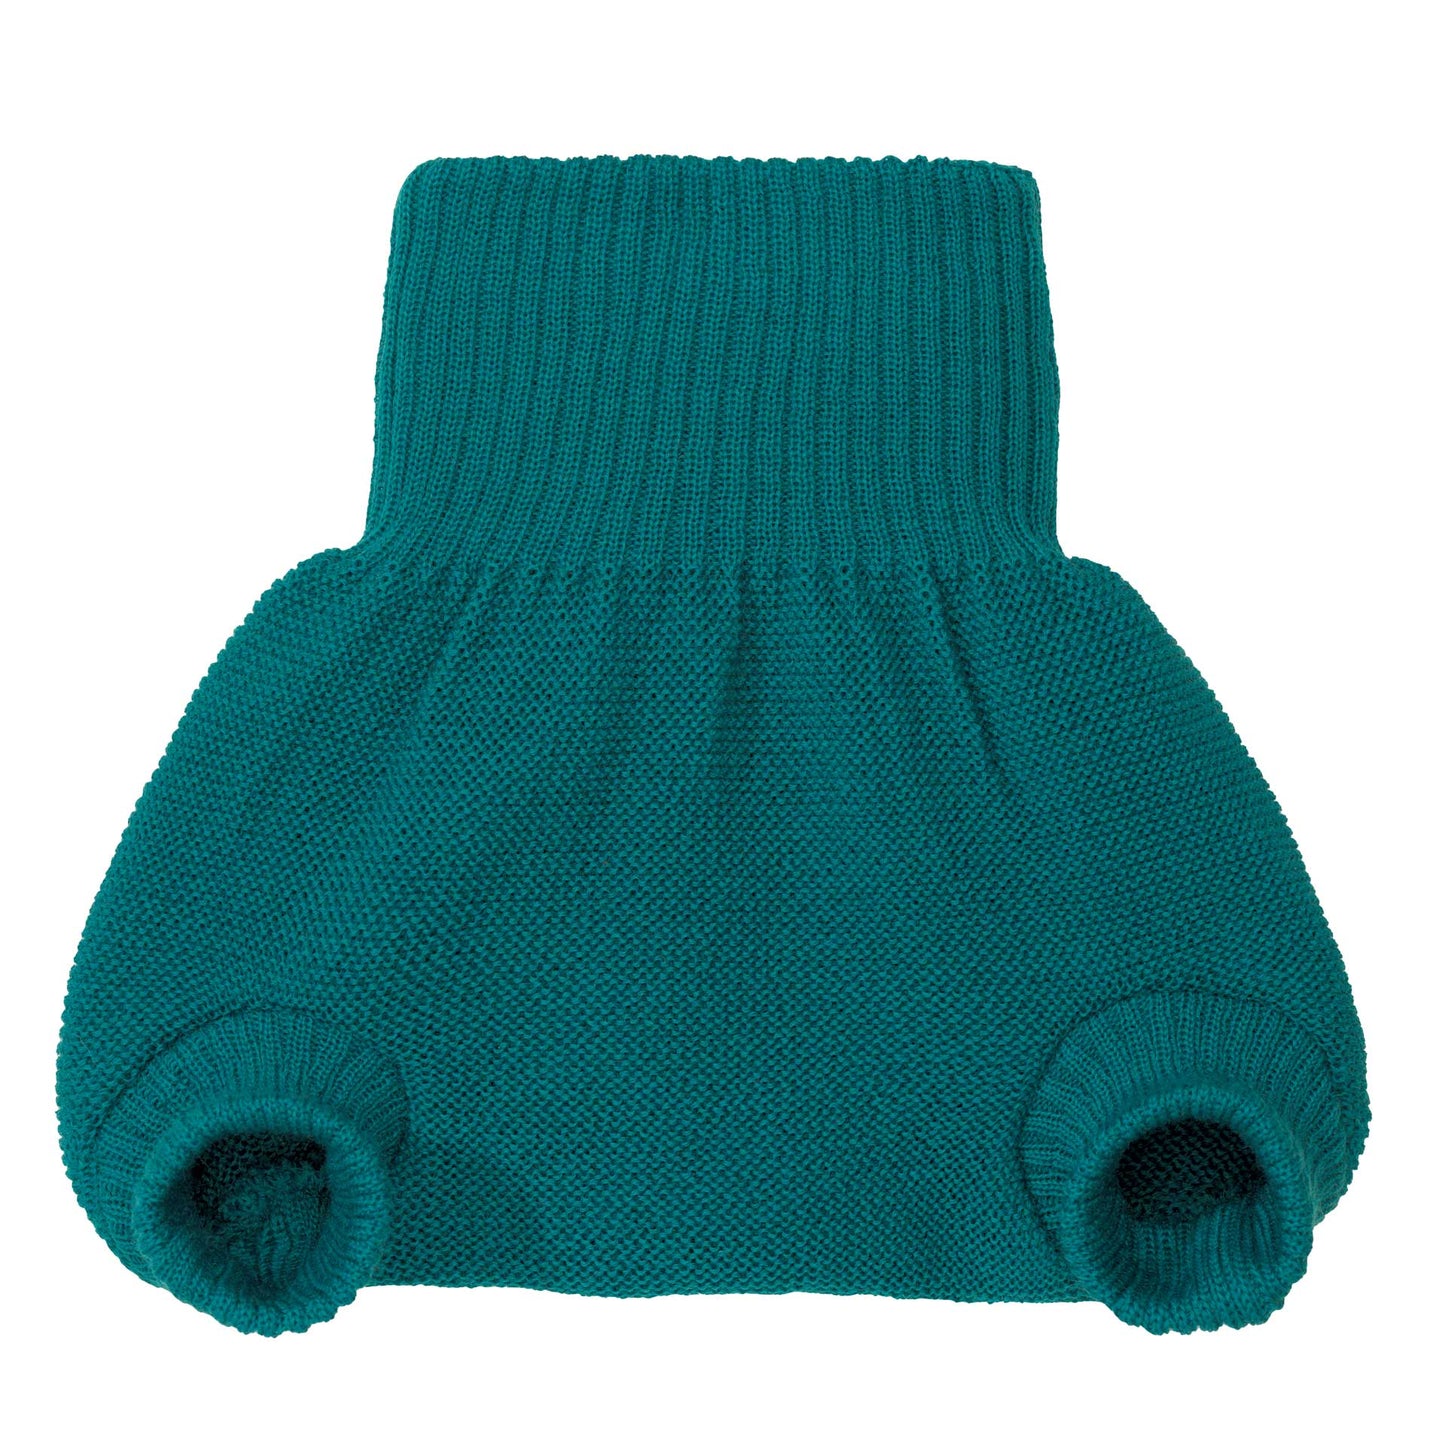 Wool Nappy Cover | 2-4 years (98/104)